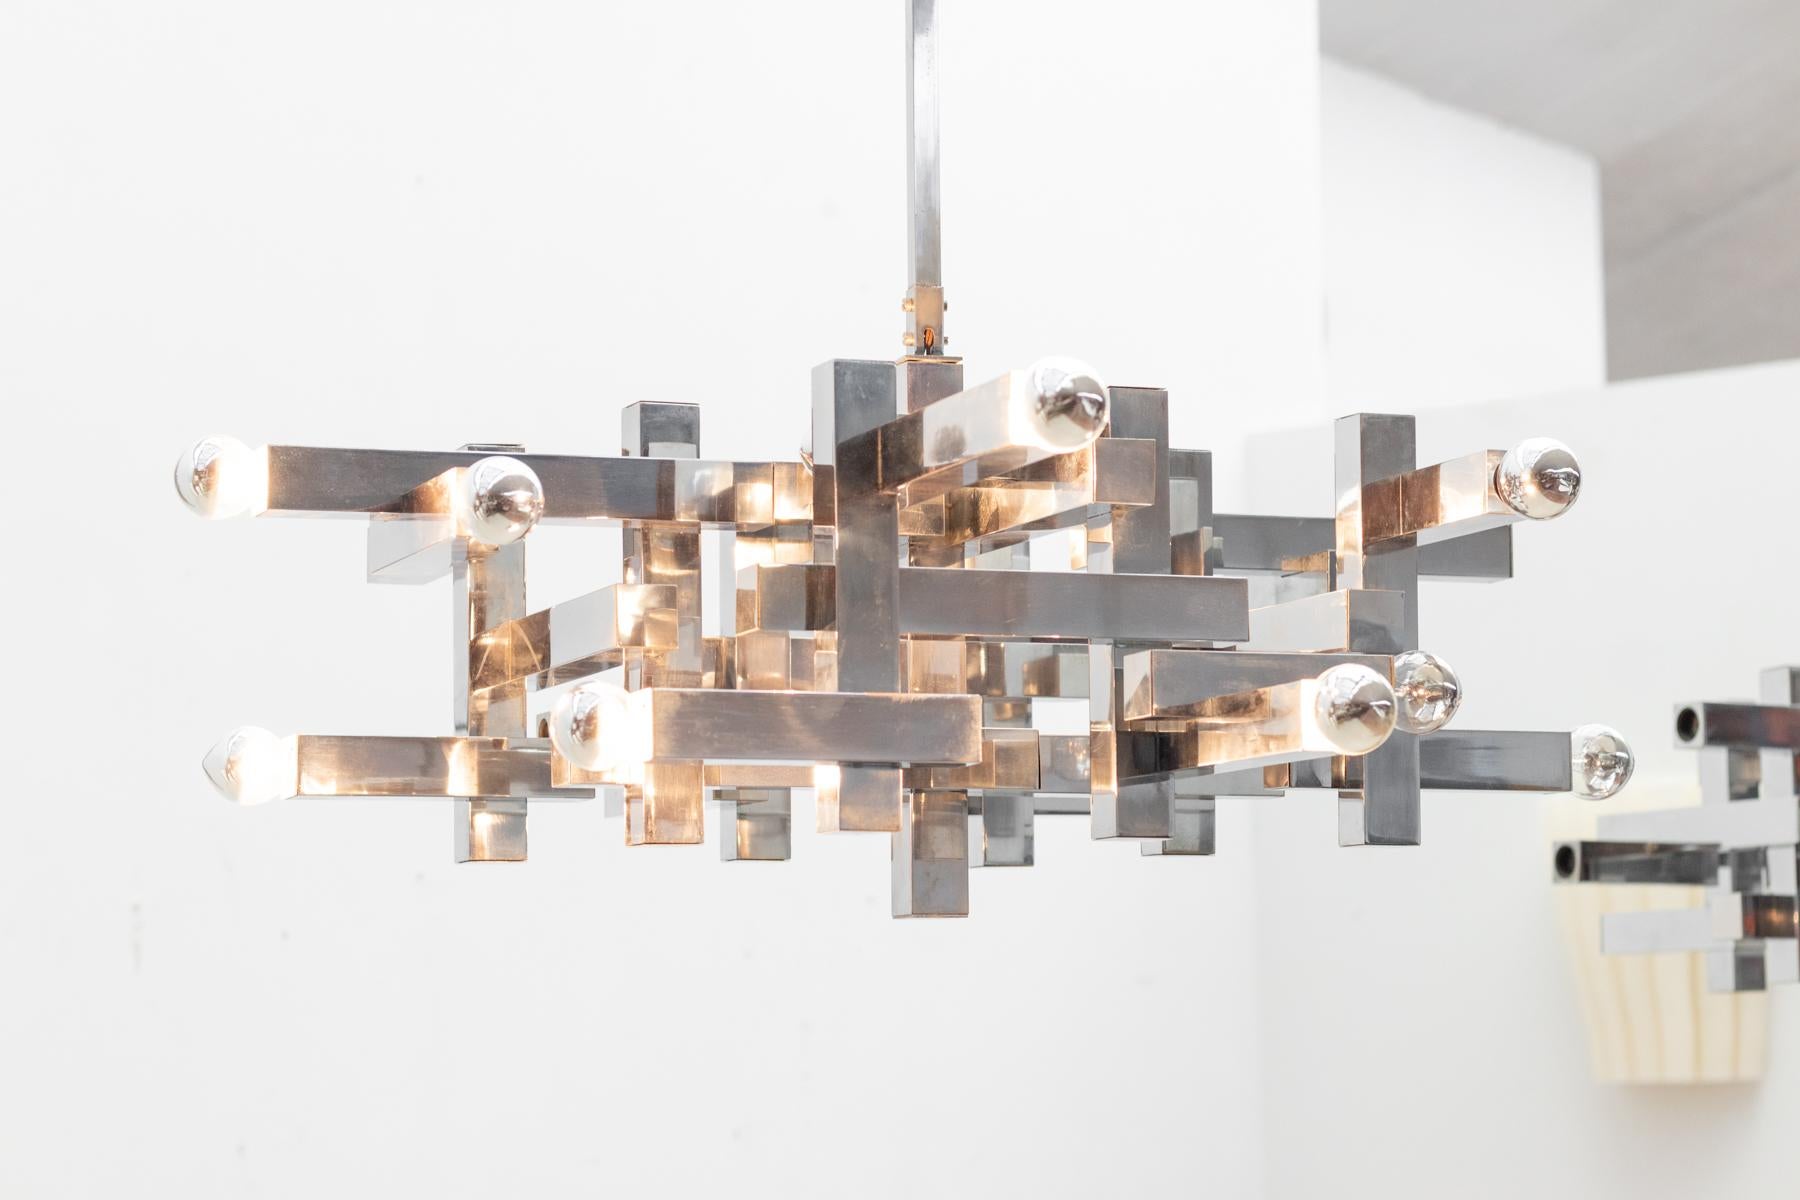  Gaetano Sciolari's Metric chandelier is characterized by its clean lines and geometric precision. The luminaire features a structured frame in polished chrome, creating a harmonious interplay of straight and angular elements.

Large model